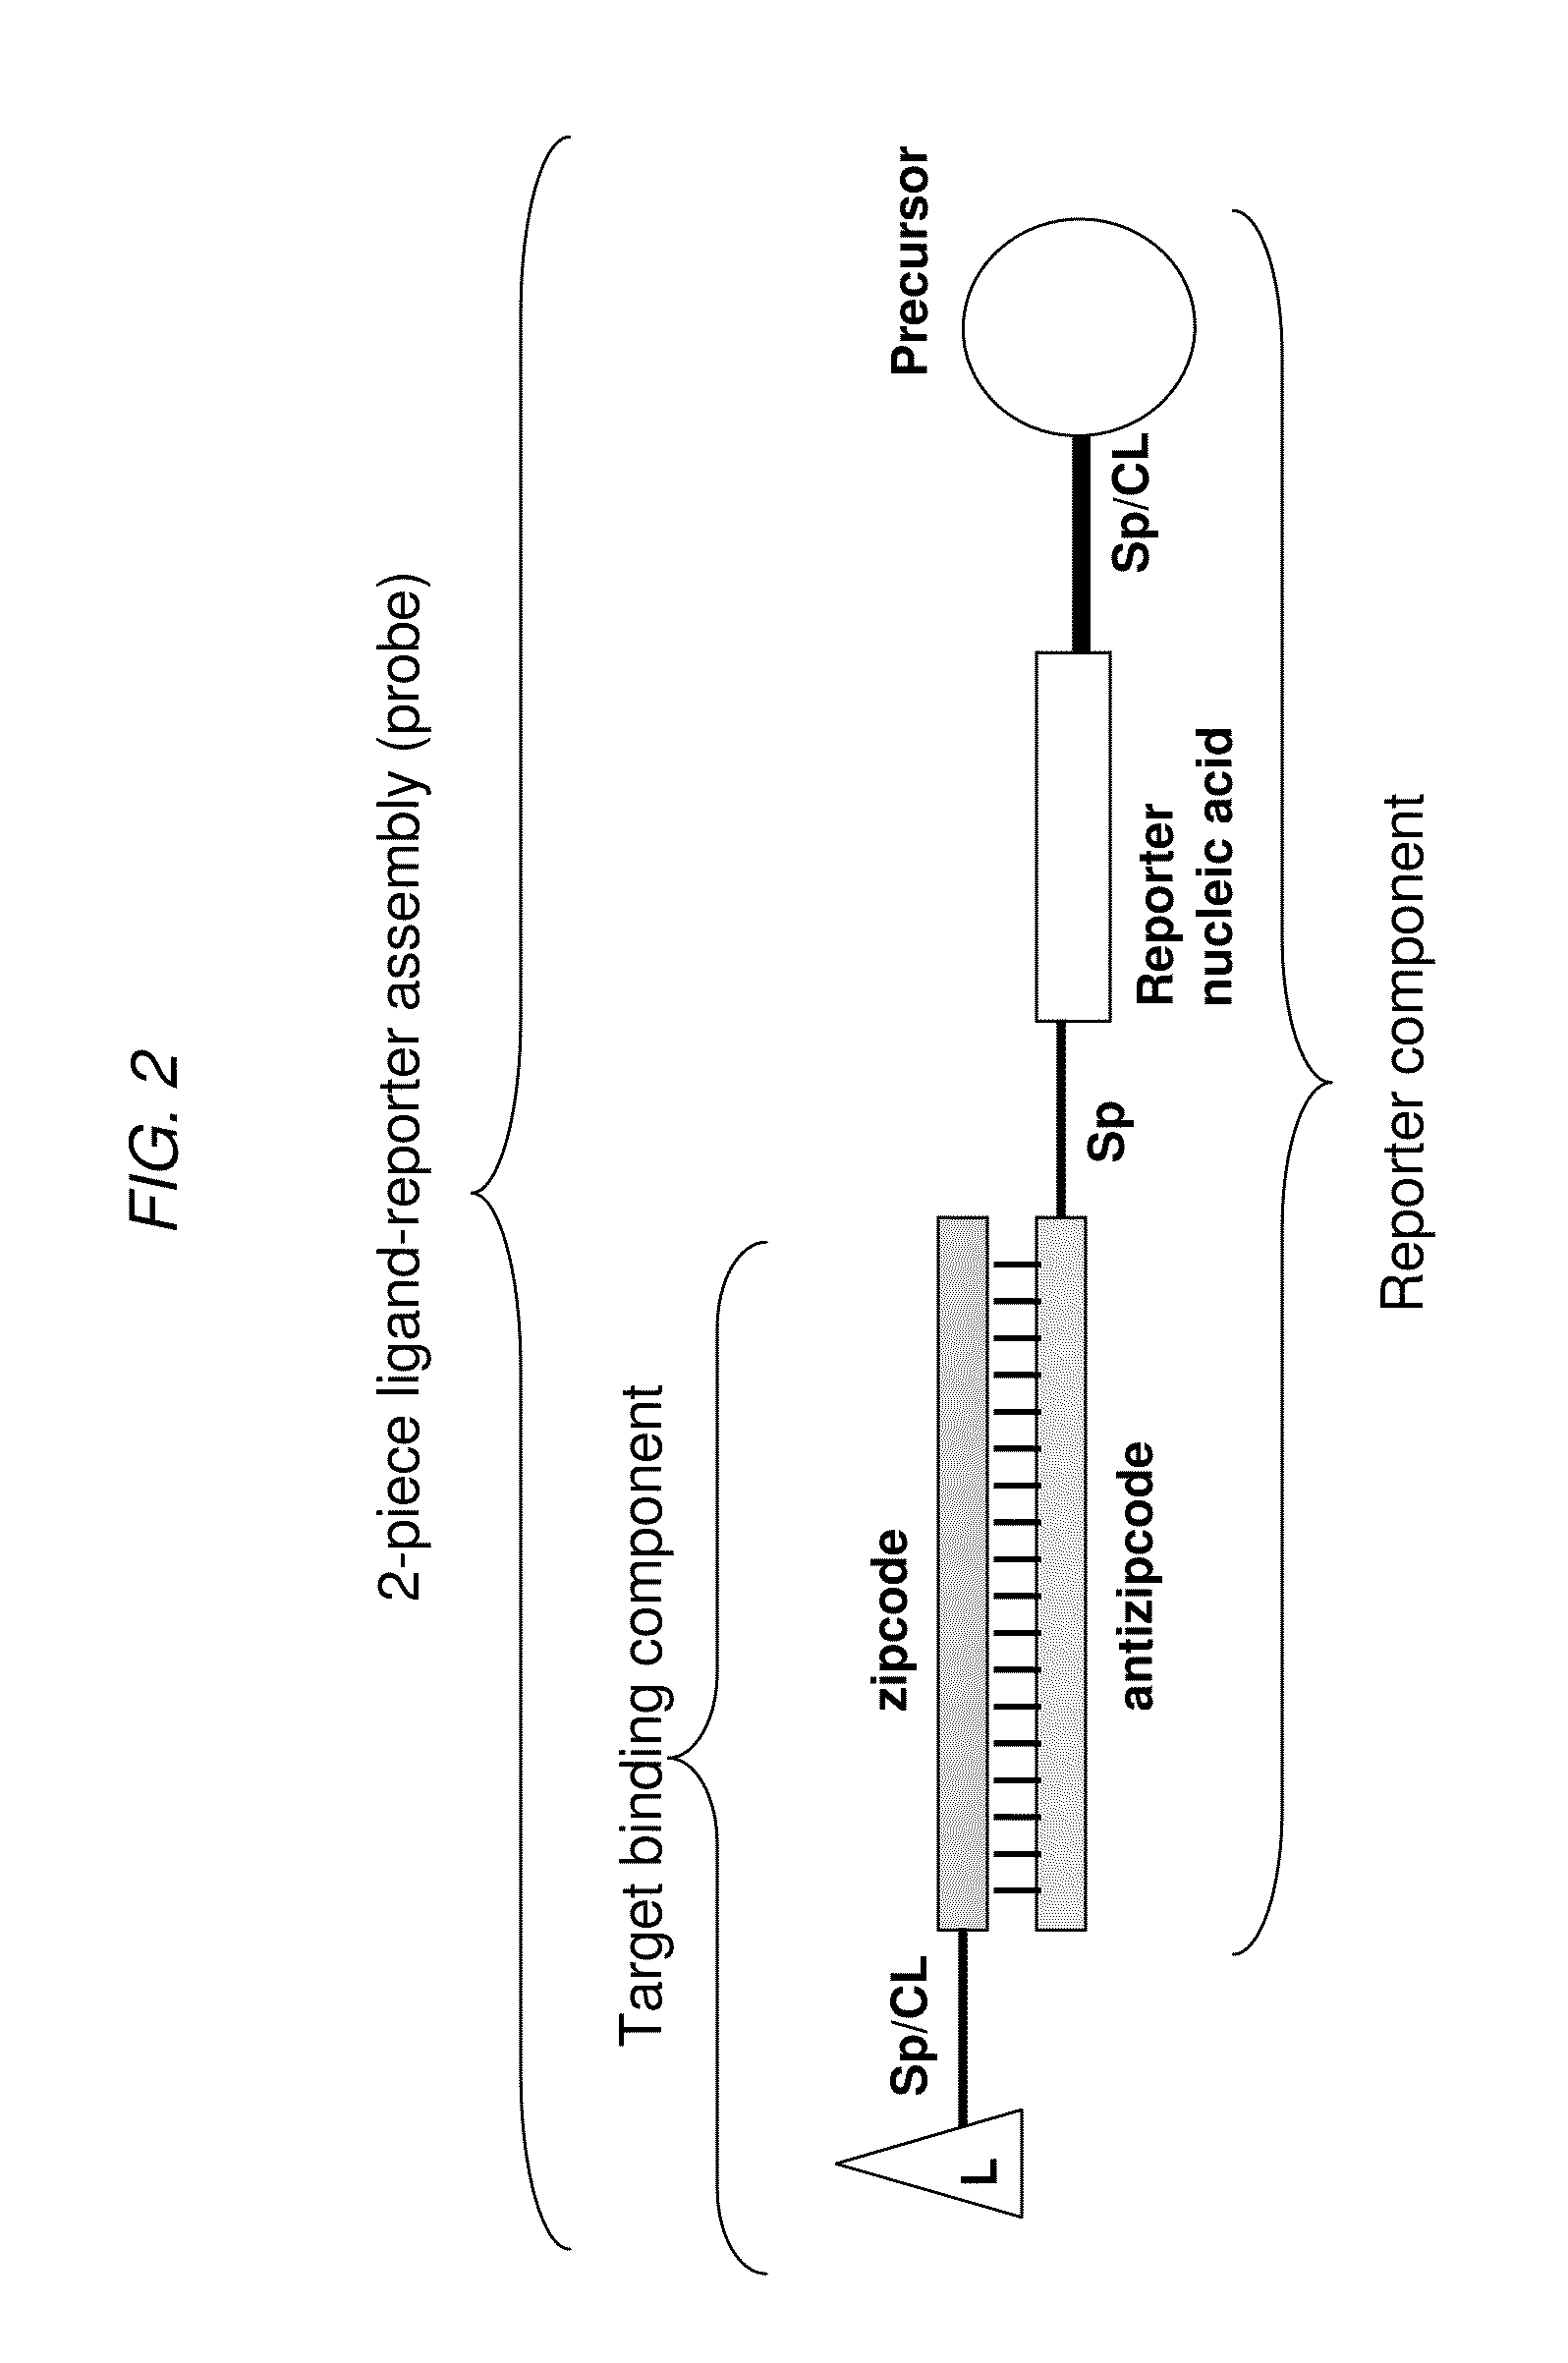 Detection Assays and Use Thereof